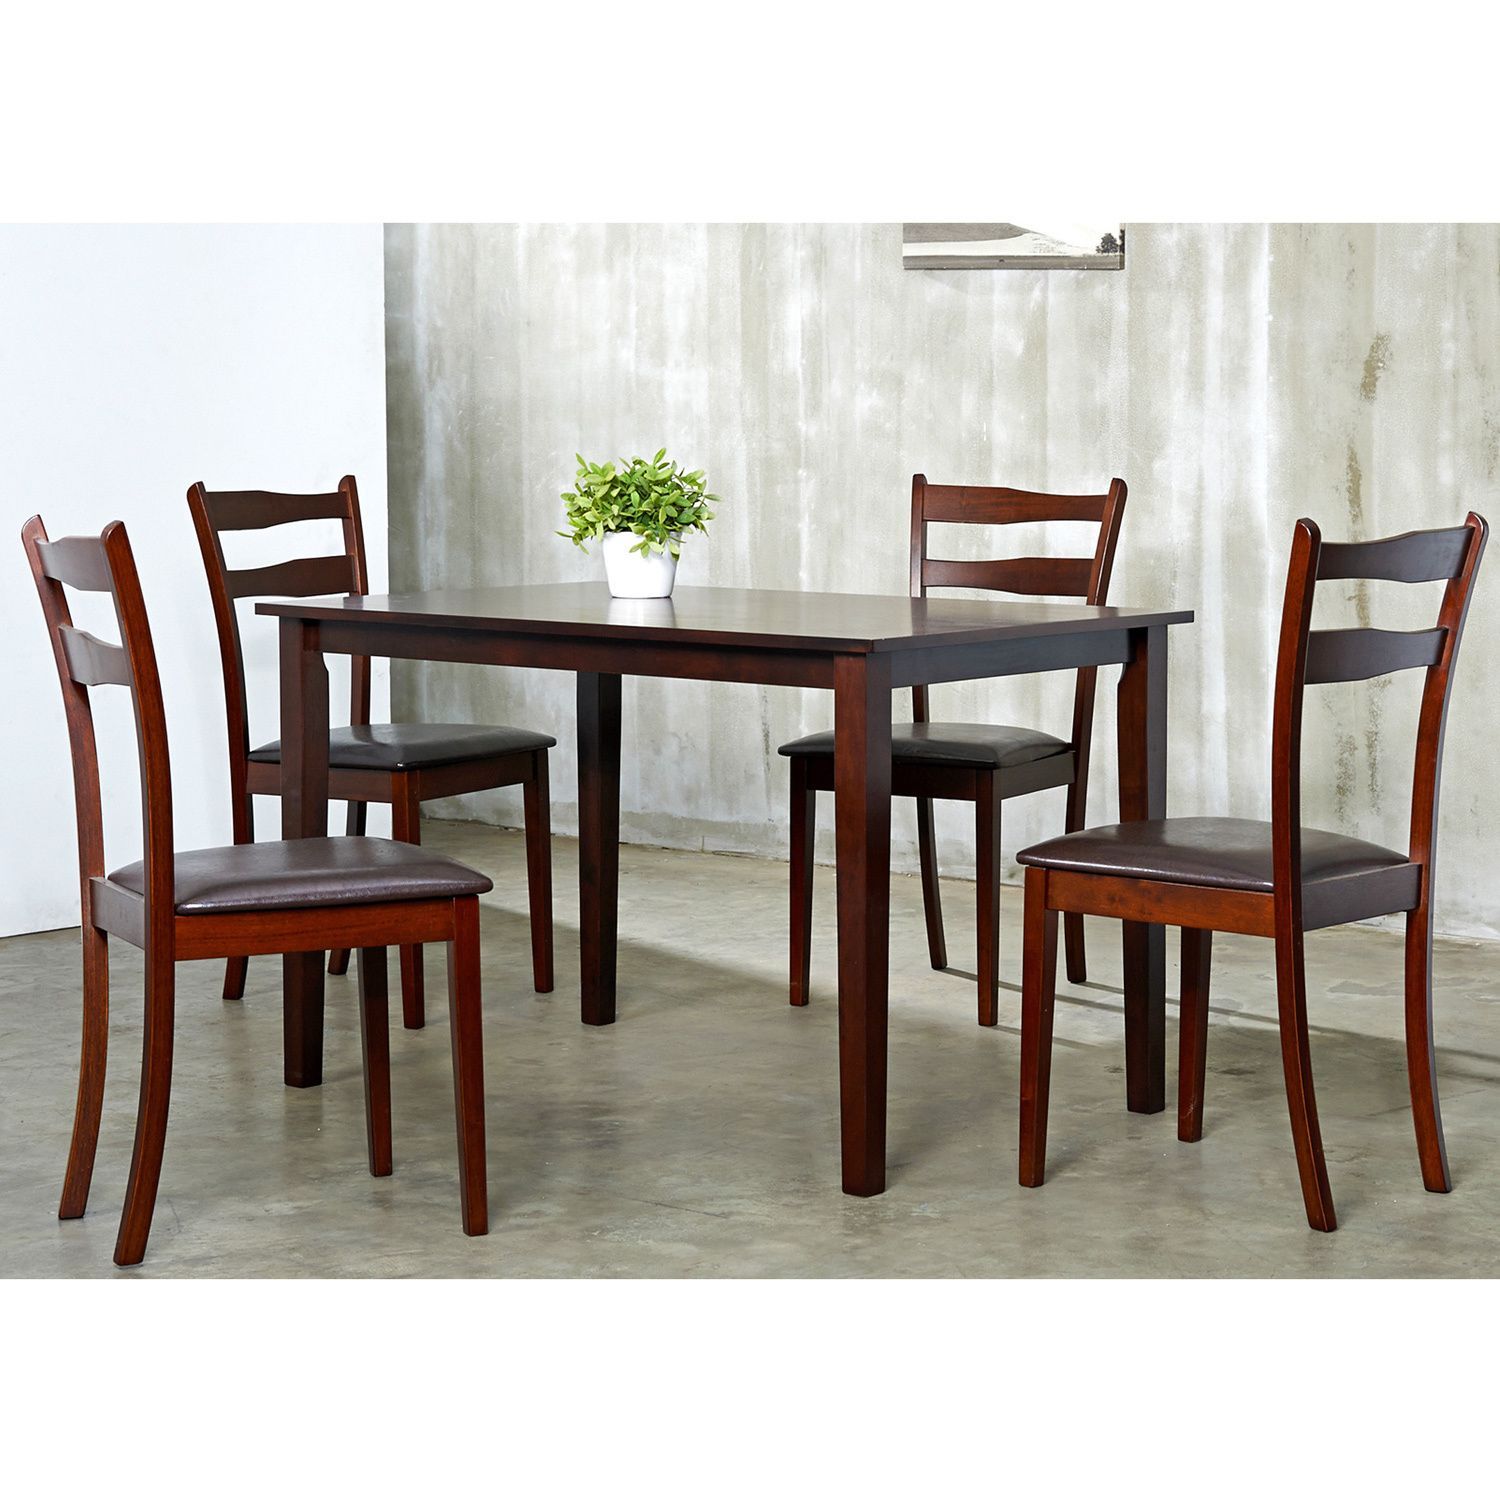 Stylish And Beautiful, These Convenient Dining Room Furniture Sets Inside Best And Newest Baxton Studio Keitaro 5 Piece Dining Sets (View 5 of 20)